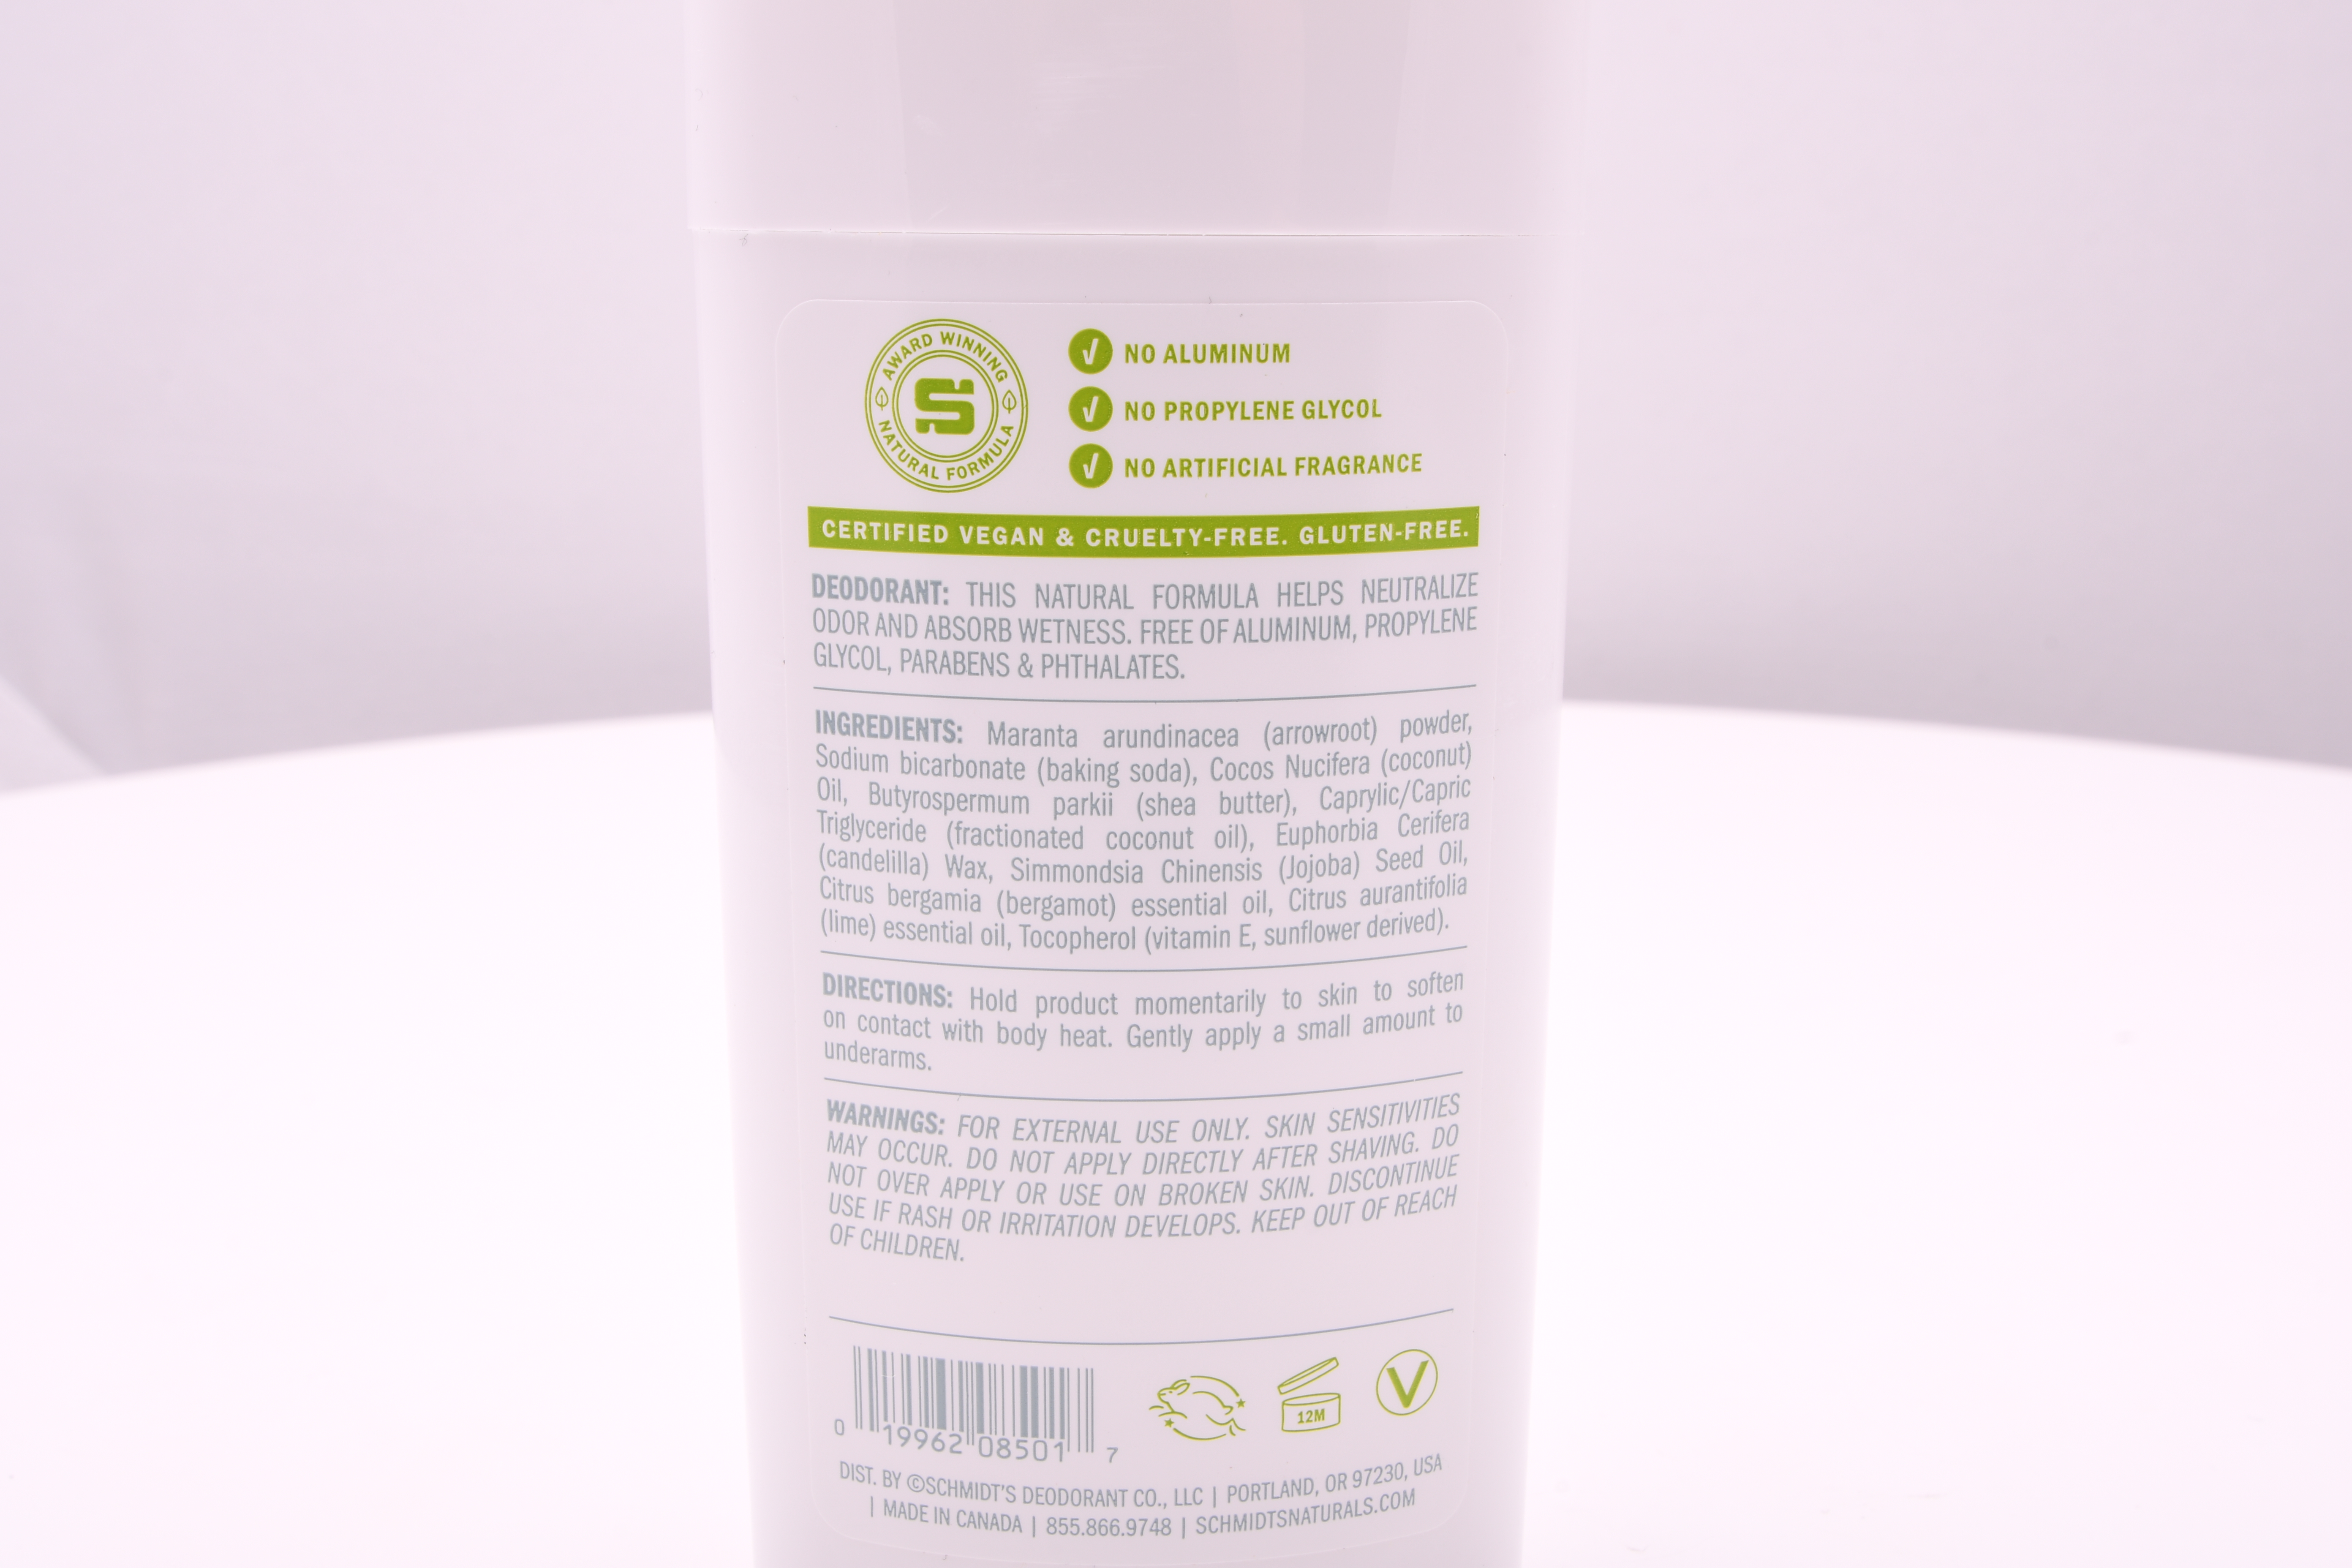 The backside of the natural deodorant, listing its ingredients and processes.